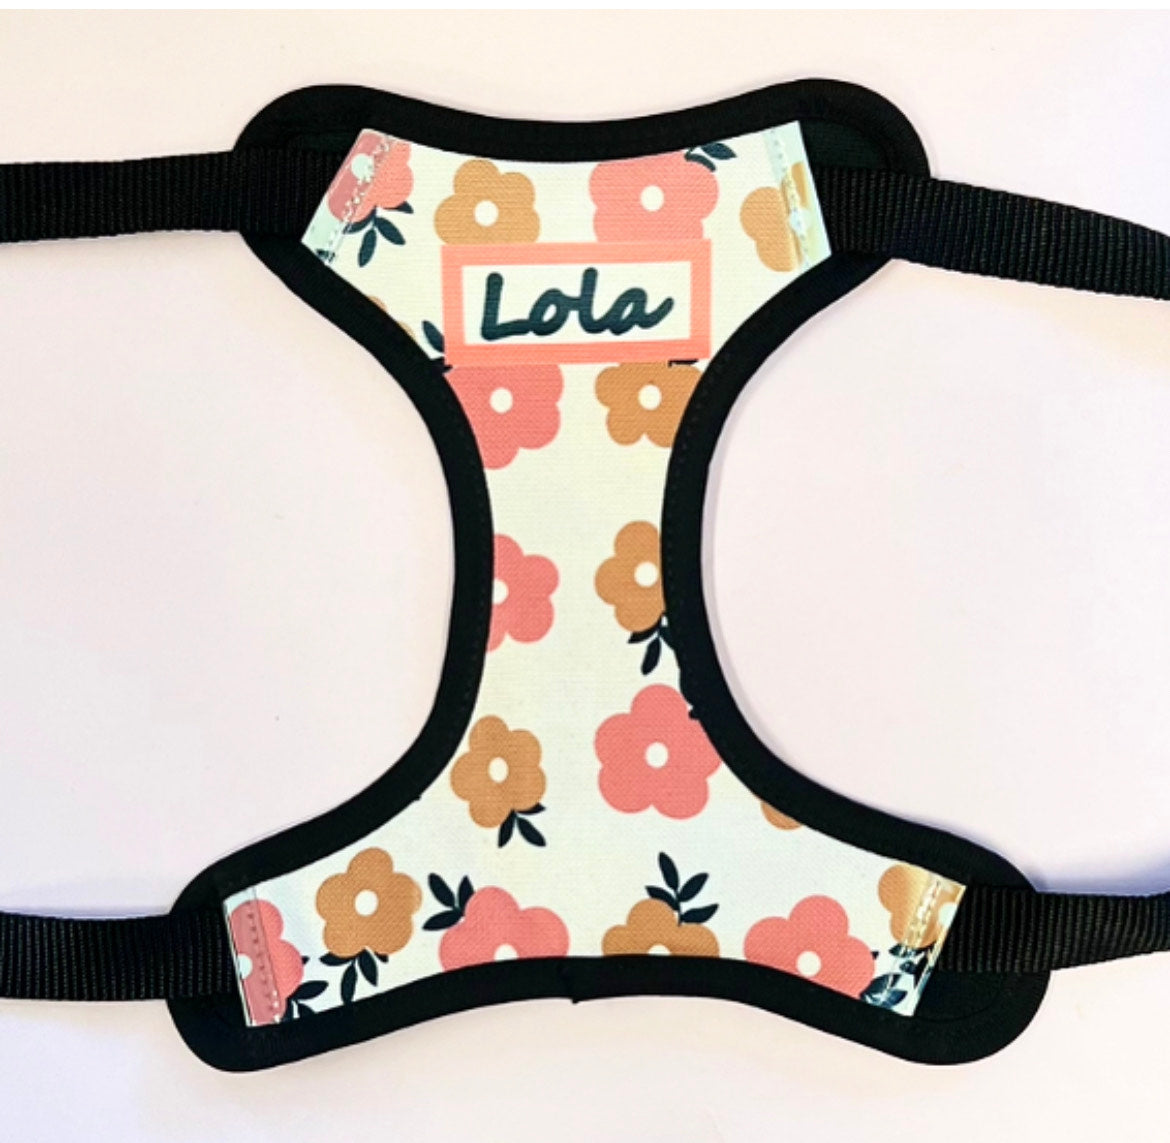 Personalised Pet Harness - Daisy Print - Add your Pets Name